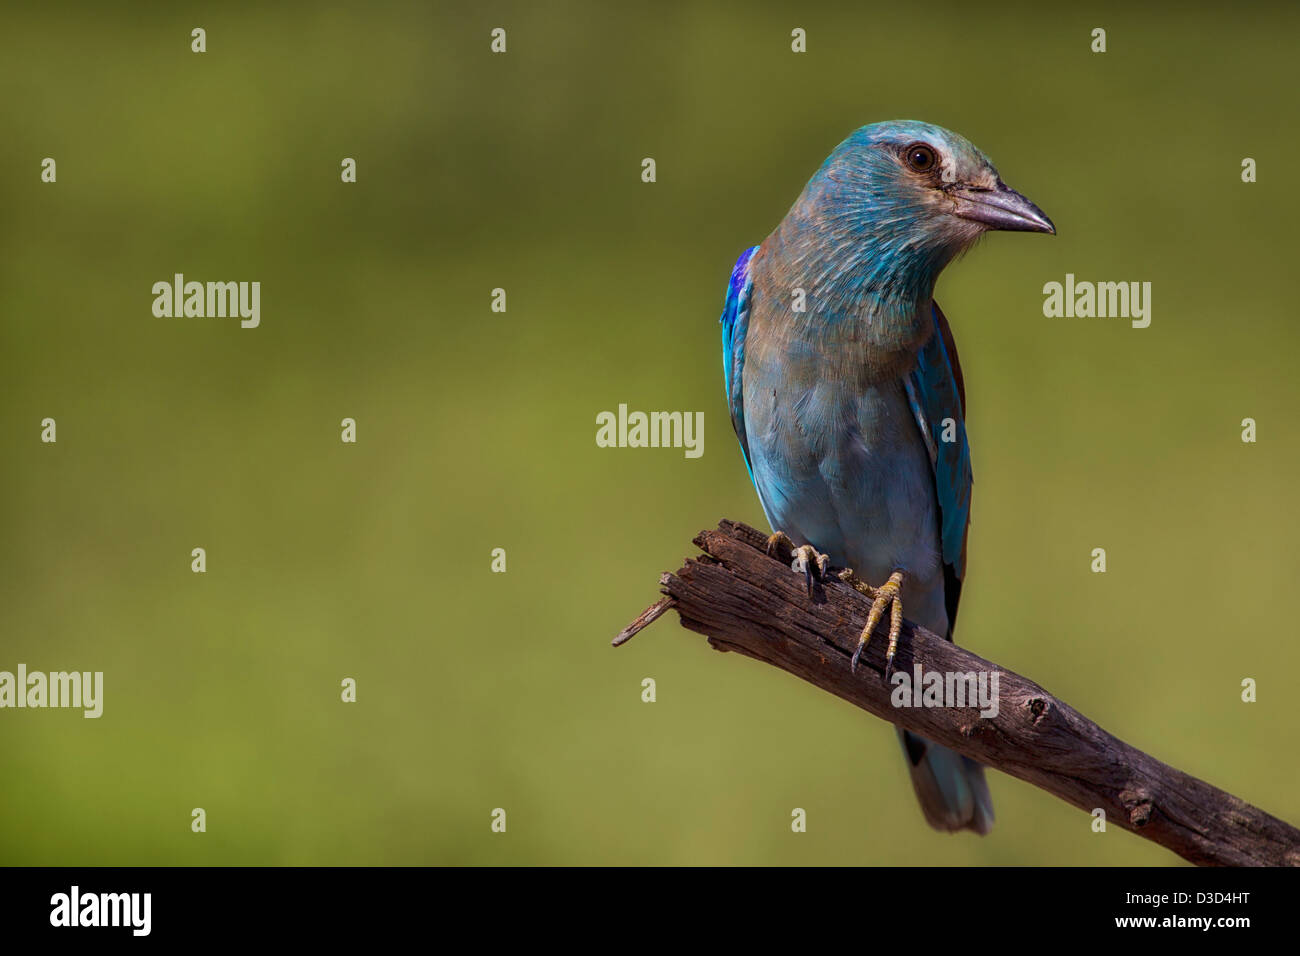 A European Roller (Coracias garrulus) captured in Kruger National Park, South Africa. It is a long-distance migrant. Stock Photo